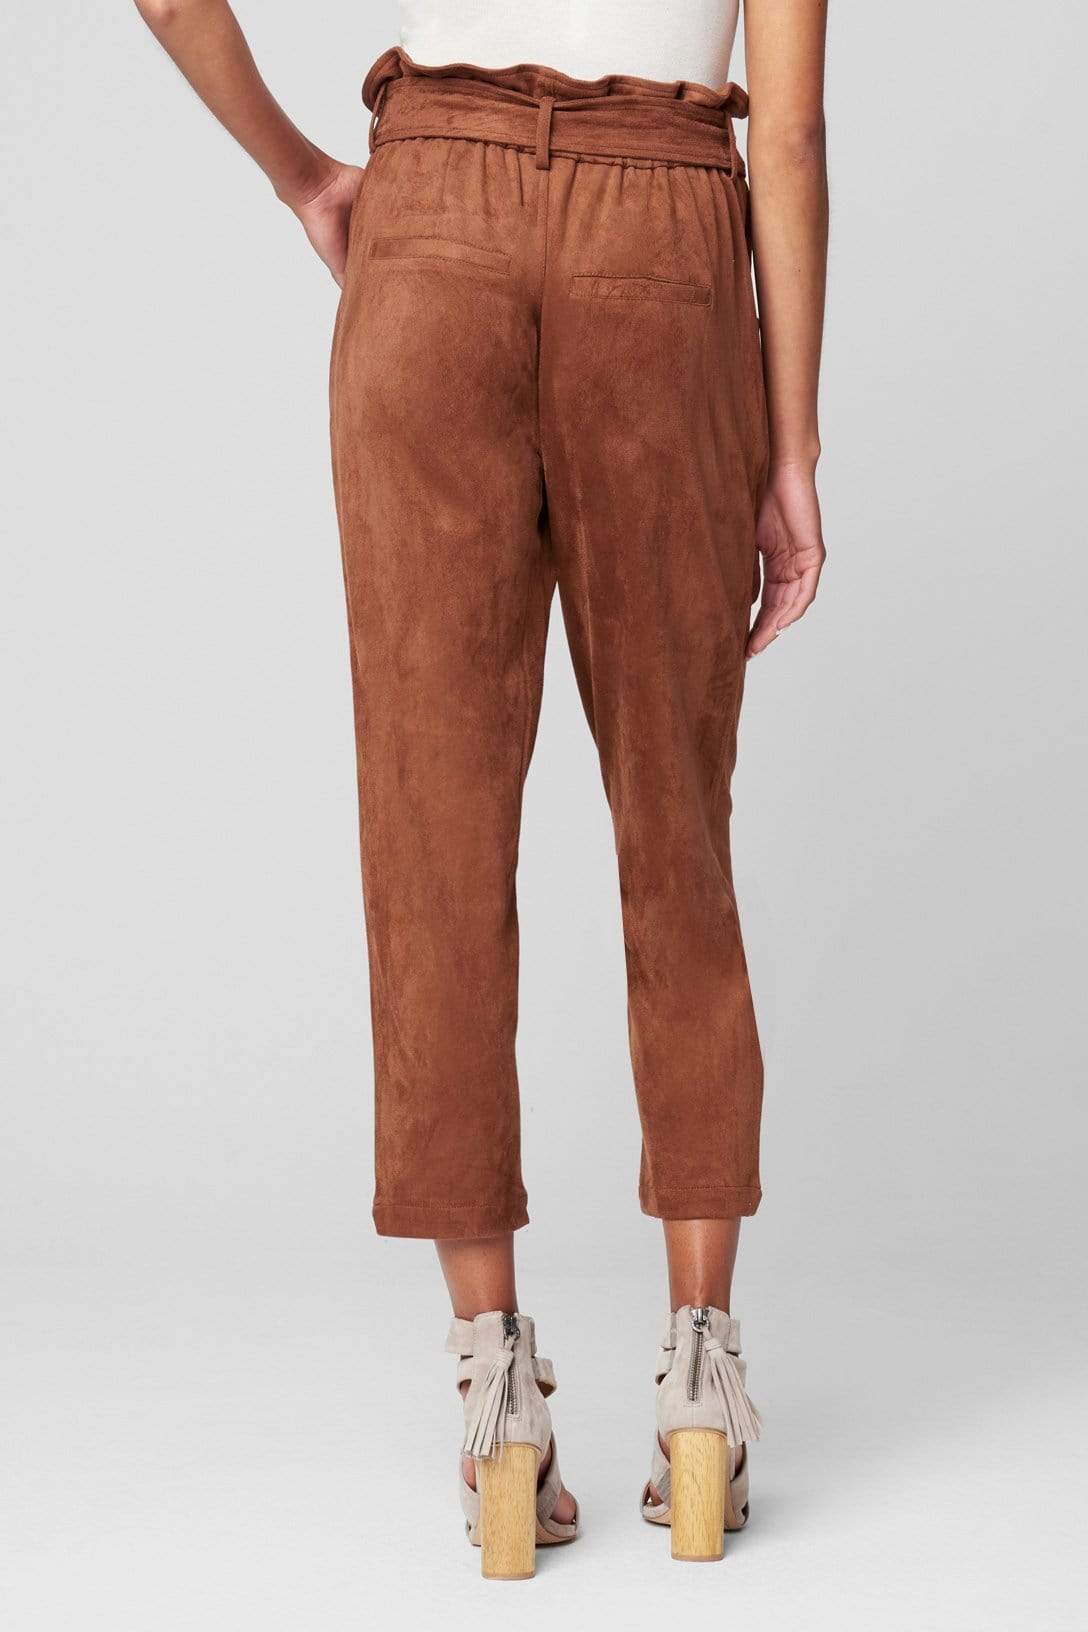 Mocha Brownie Tie Flowy Pants, Bottoms by Blank NYC | LIT Boutique